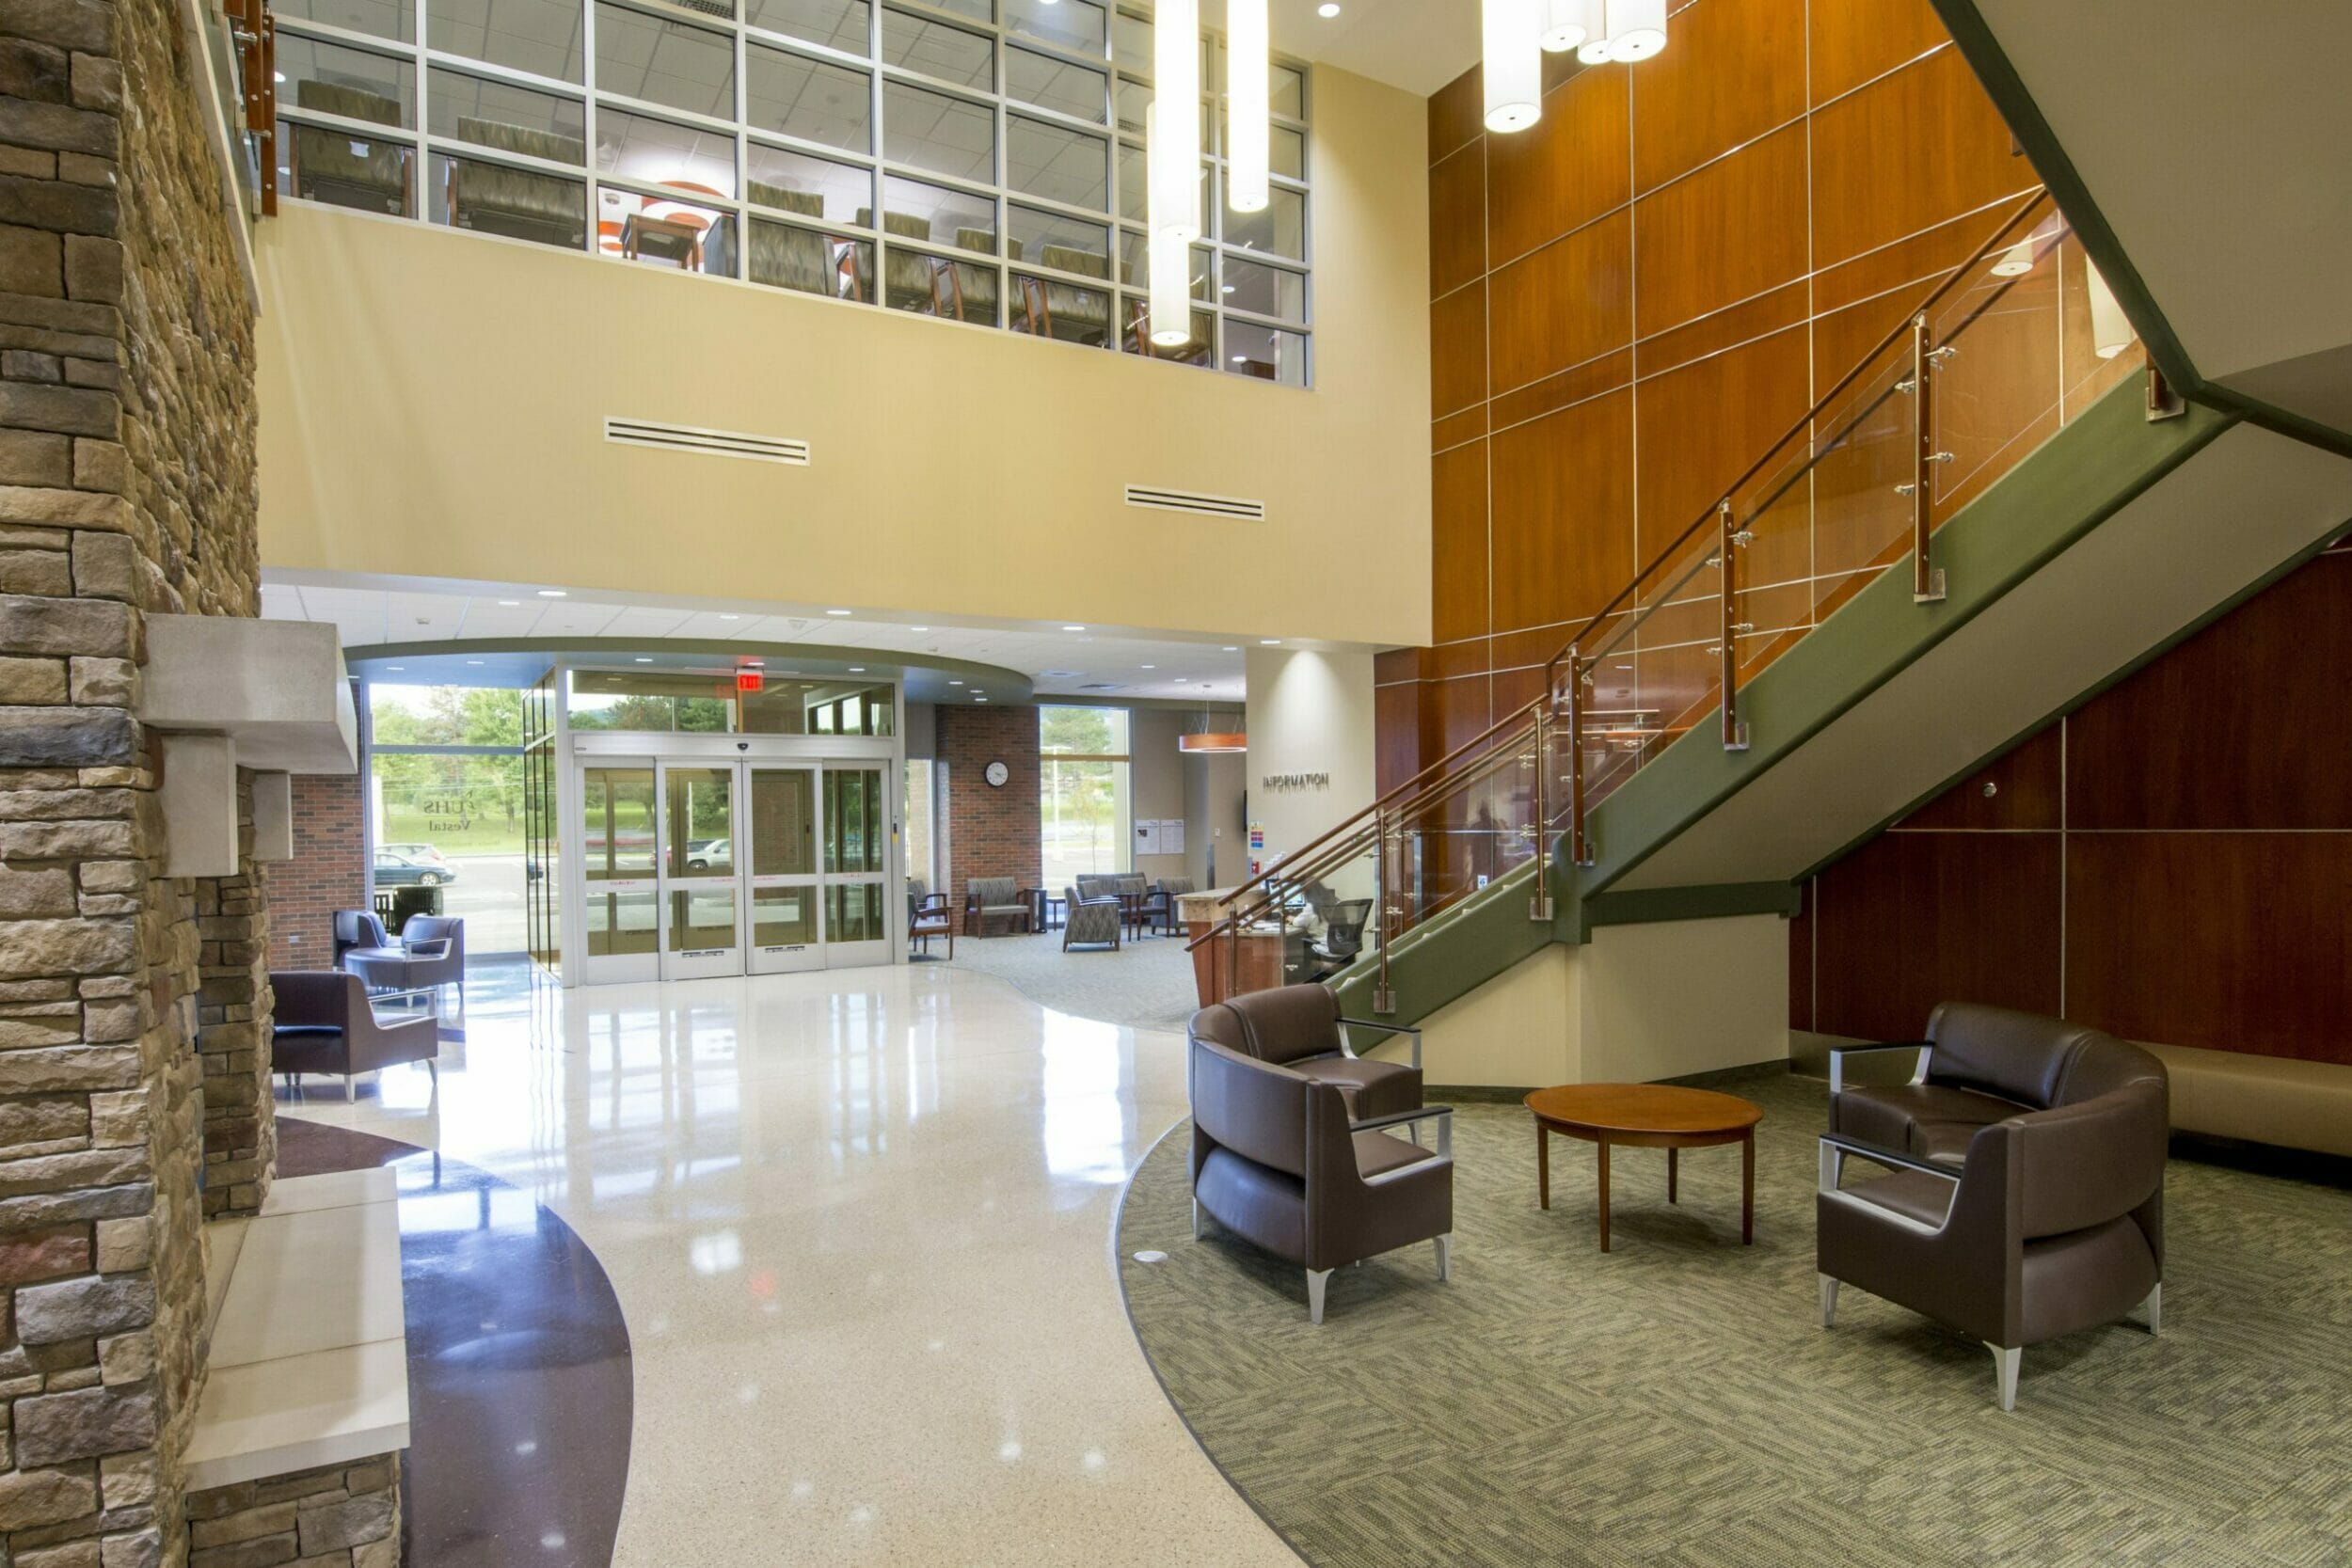 Two-story, medical office lobby looking to the entrance from the inside, with a lounge area by a stone fireplace